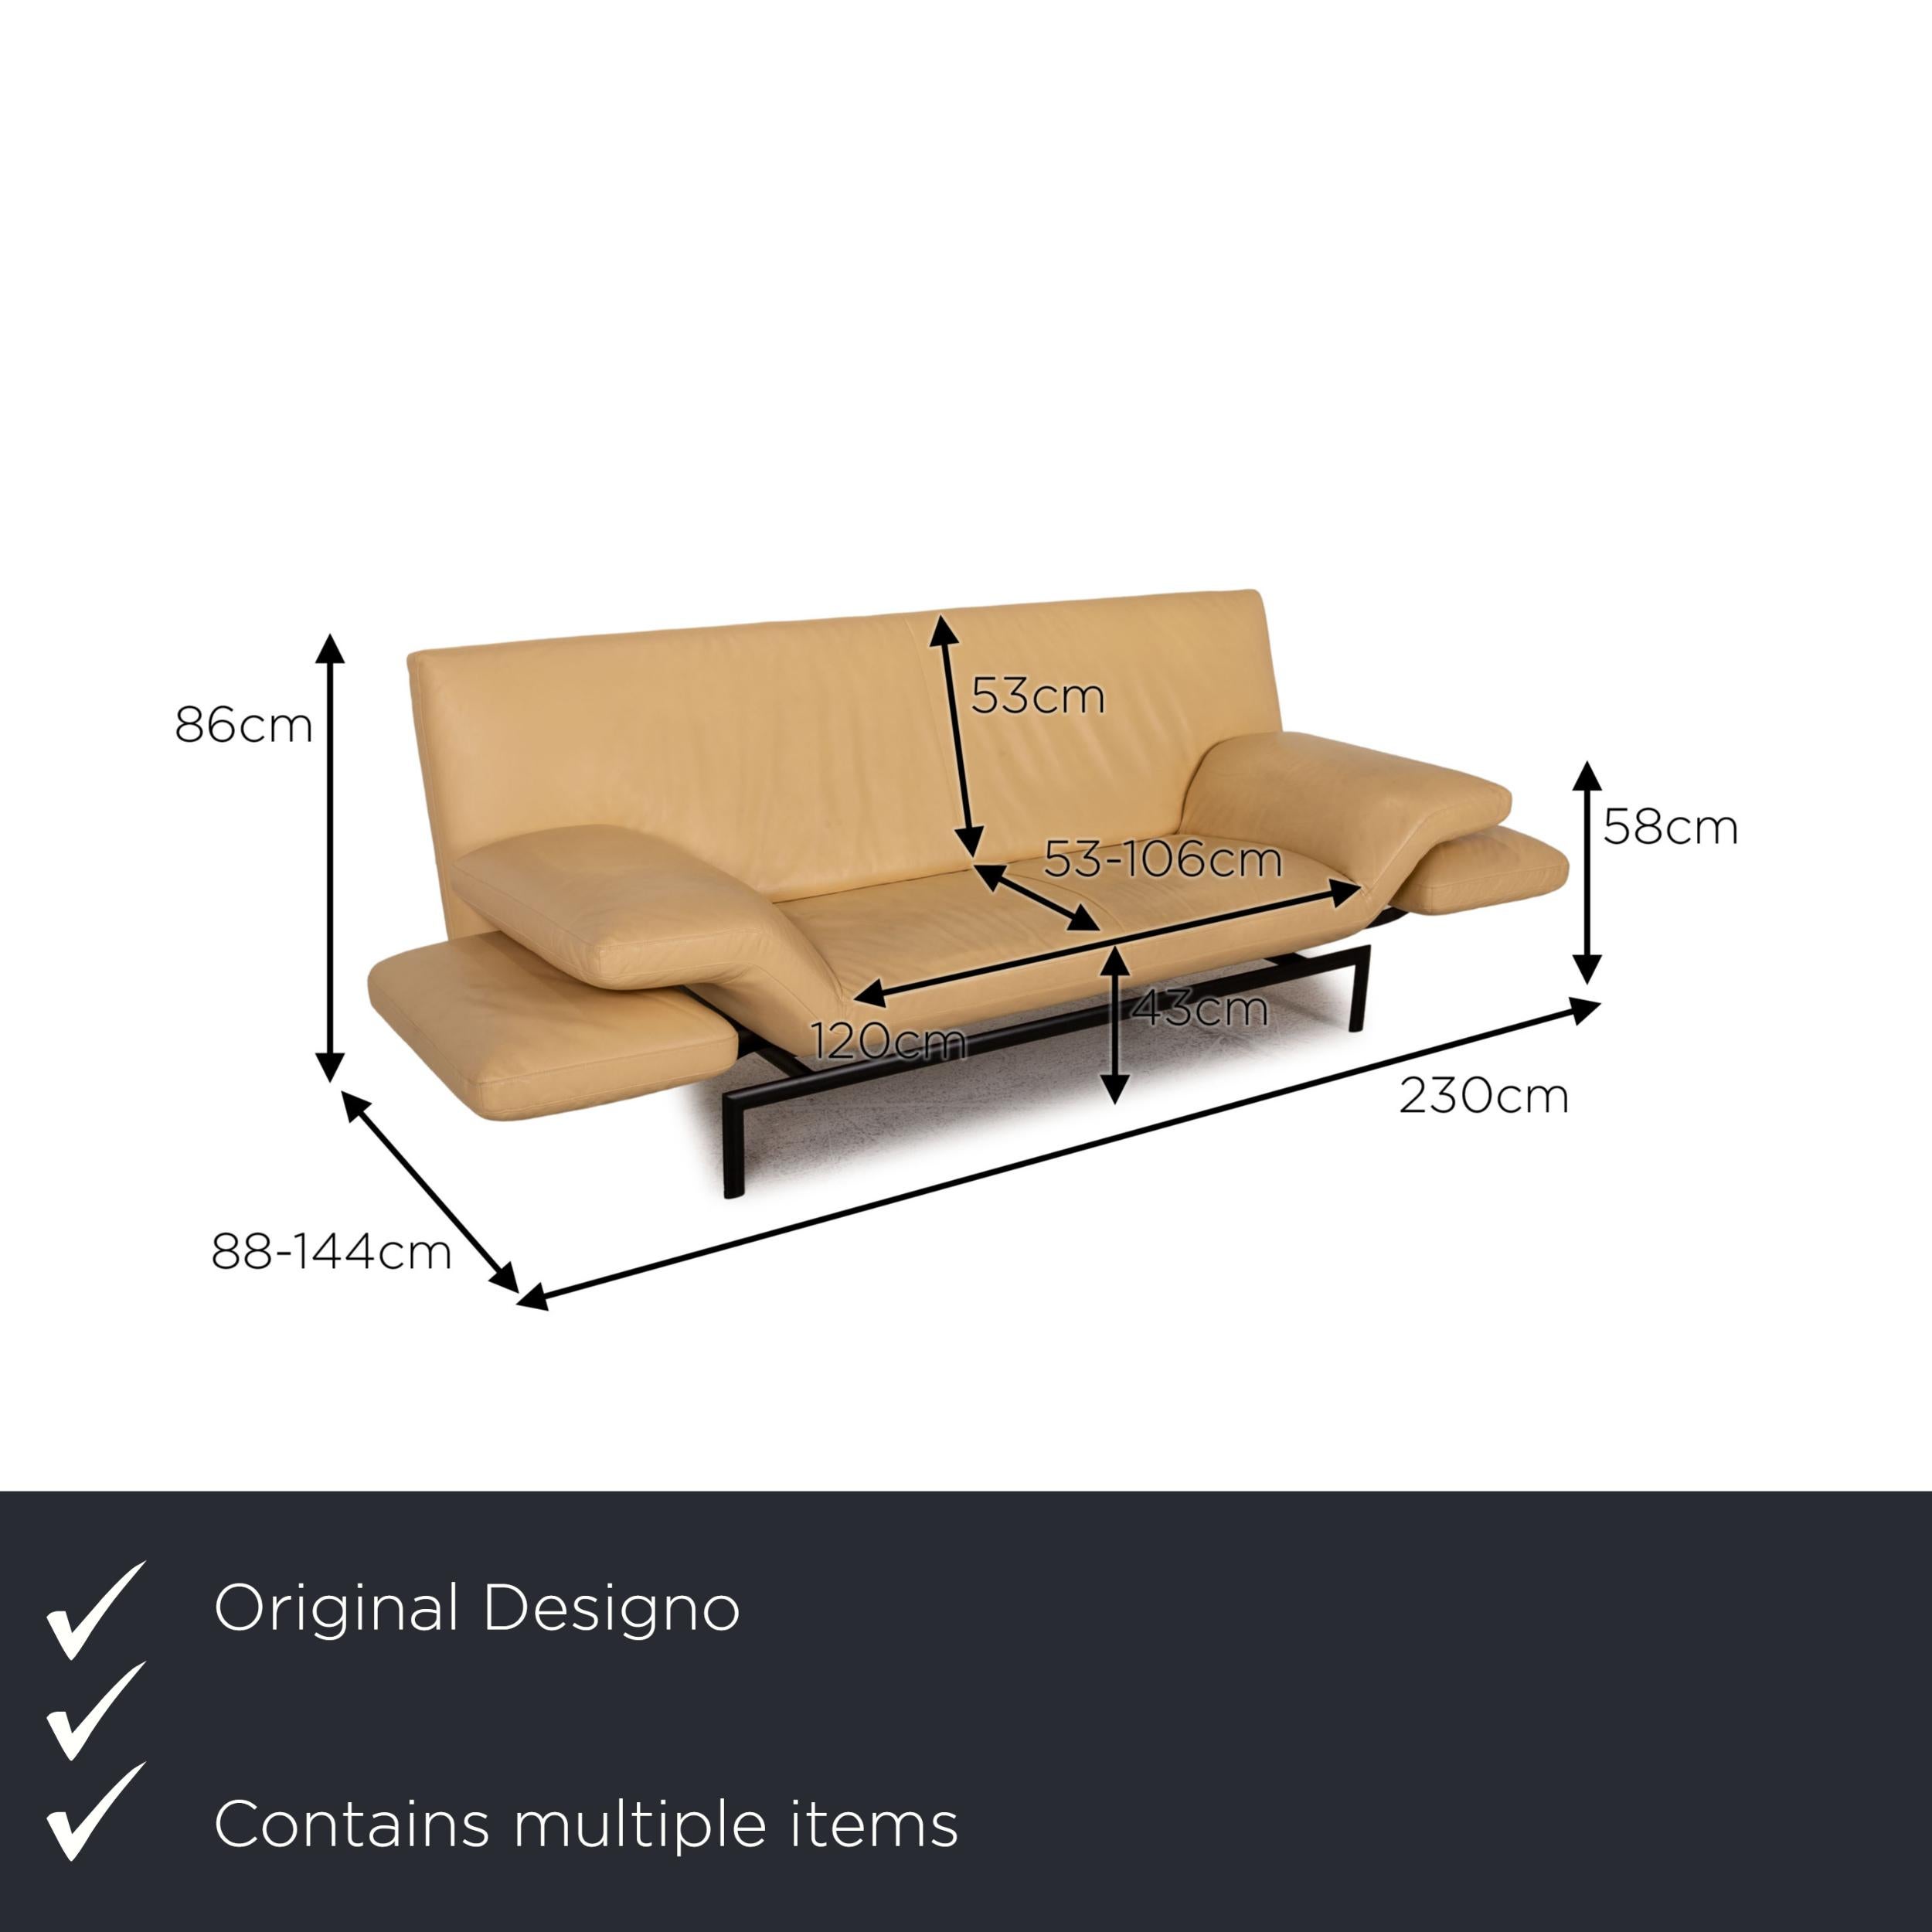 We present to you a Designo Flyer leather sofa set cream 2x two-seater couch function relaxation.

Product measurements in centimeters:

depth: 88
width: 230
height: 86
seat height: 43
rest height: 58
seat depth: 53
seat width: 120
back